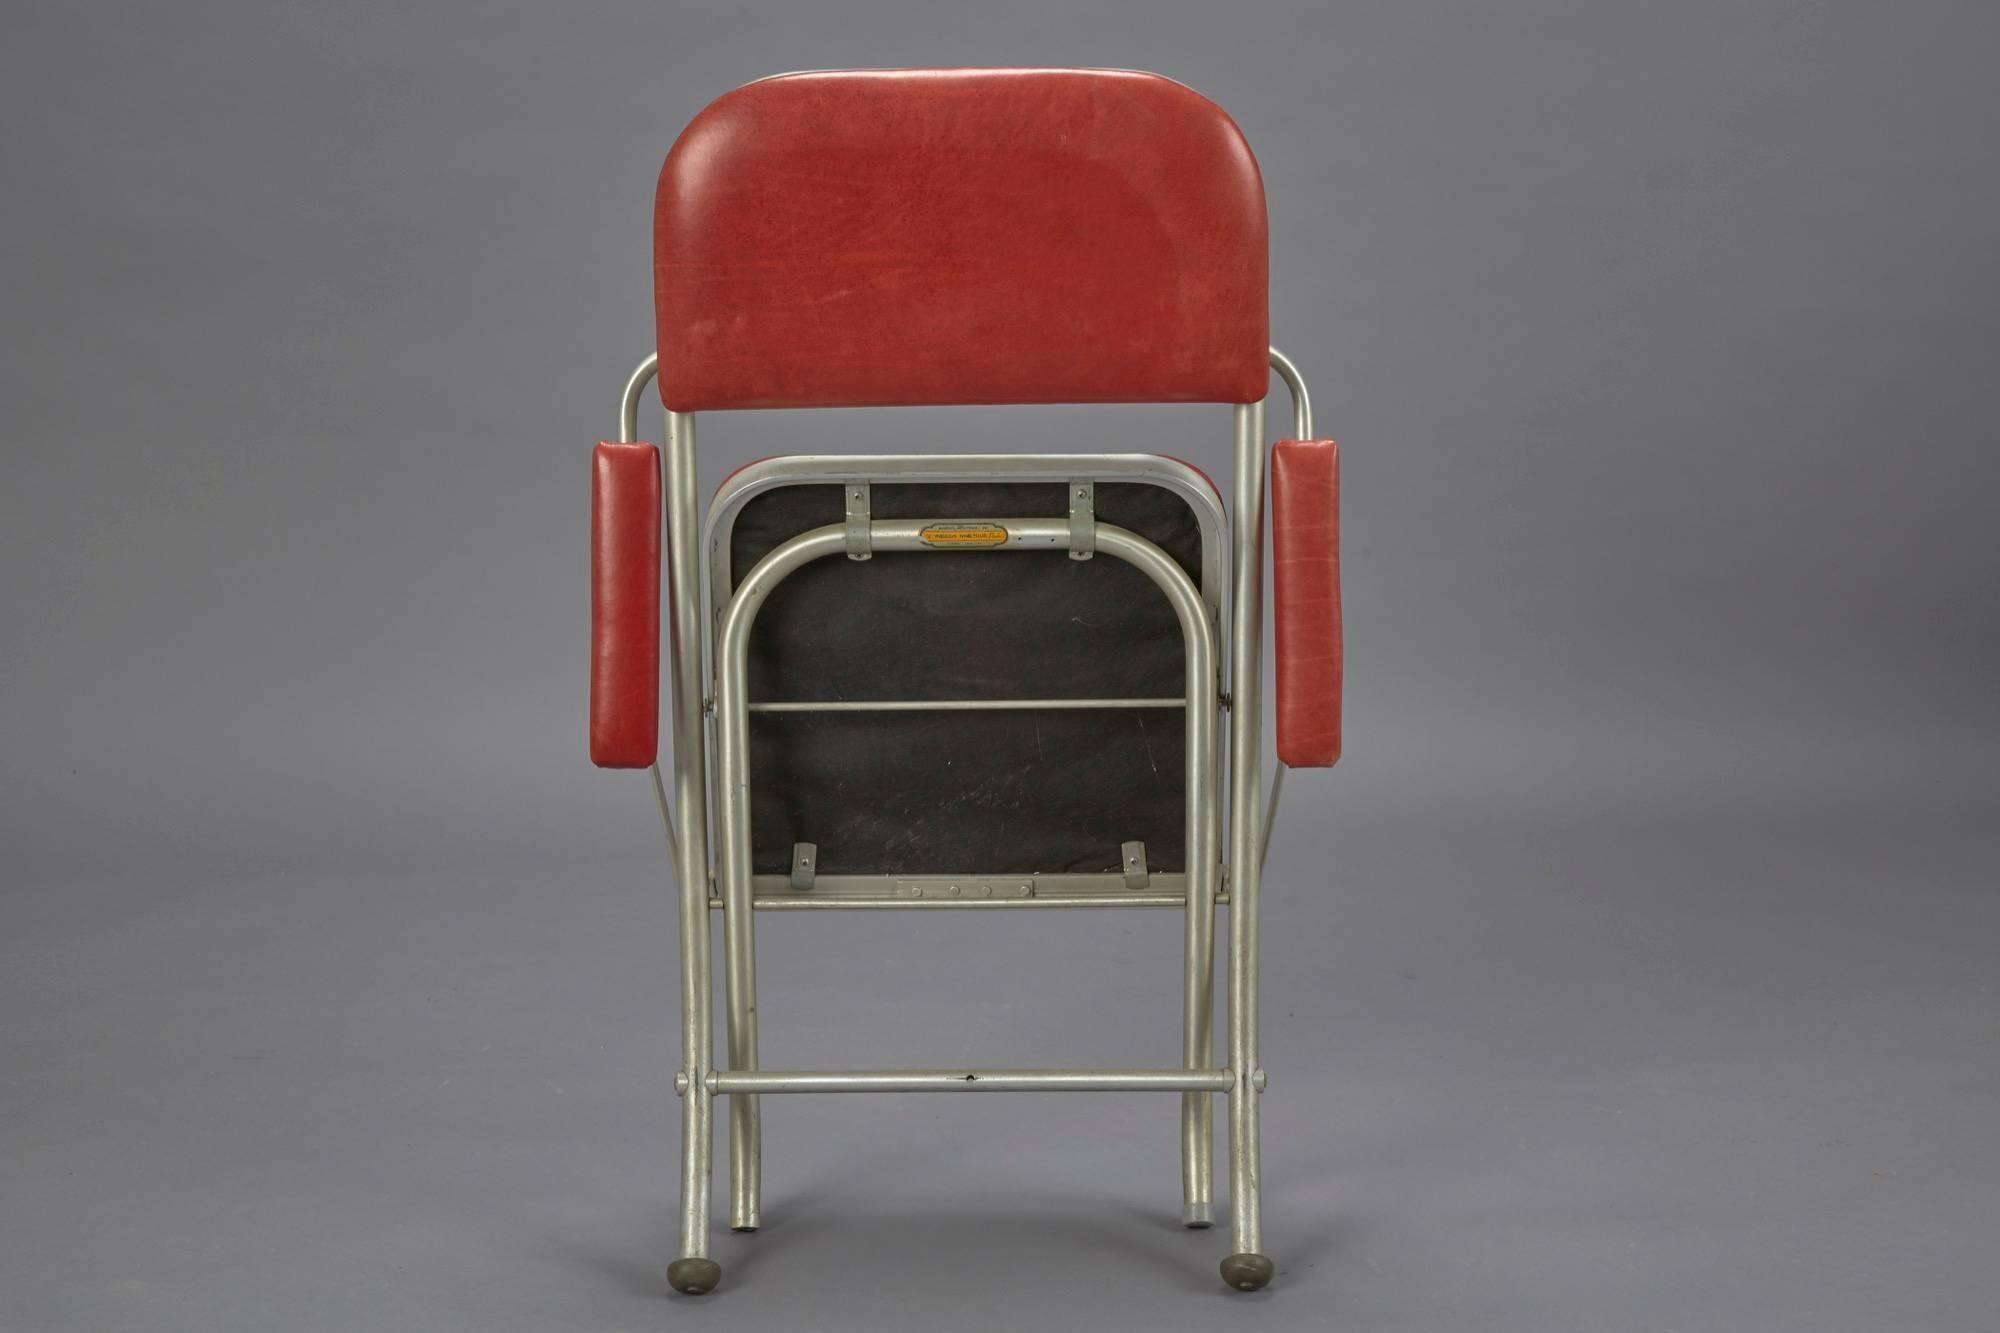 American Art Deco Folding Chairs by Warren McArthur for Mayfair Industries